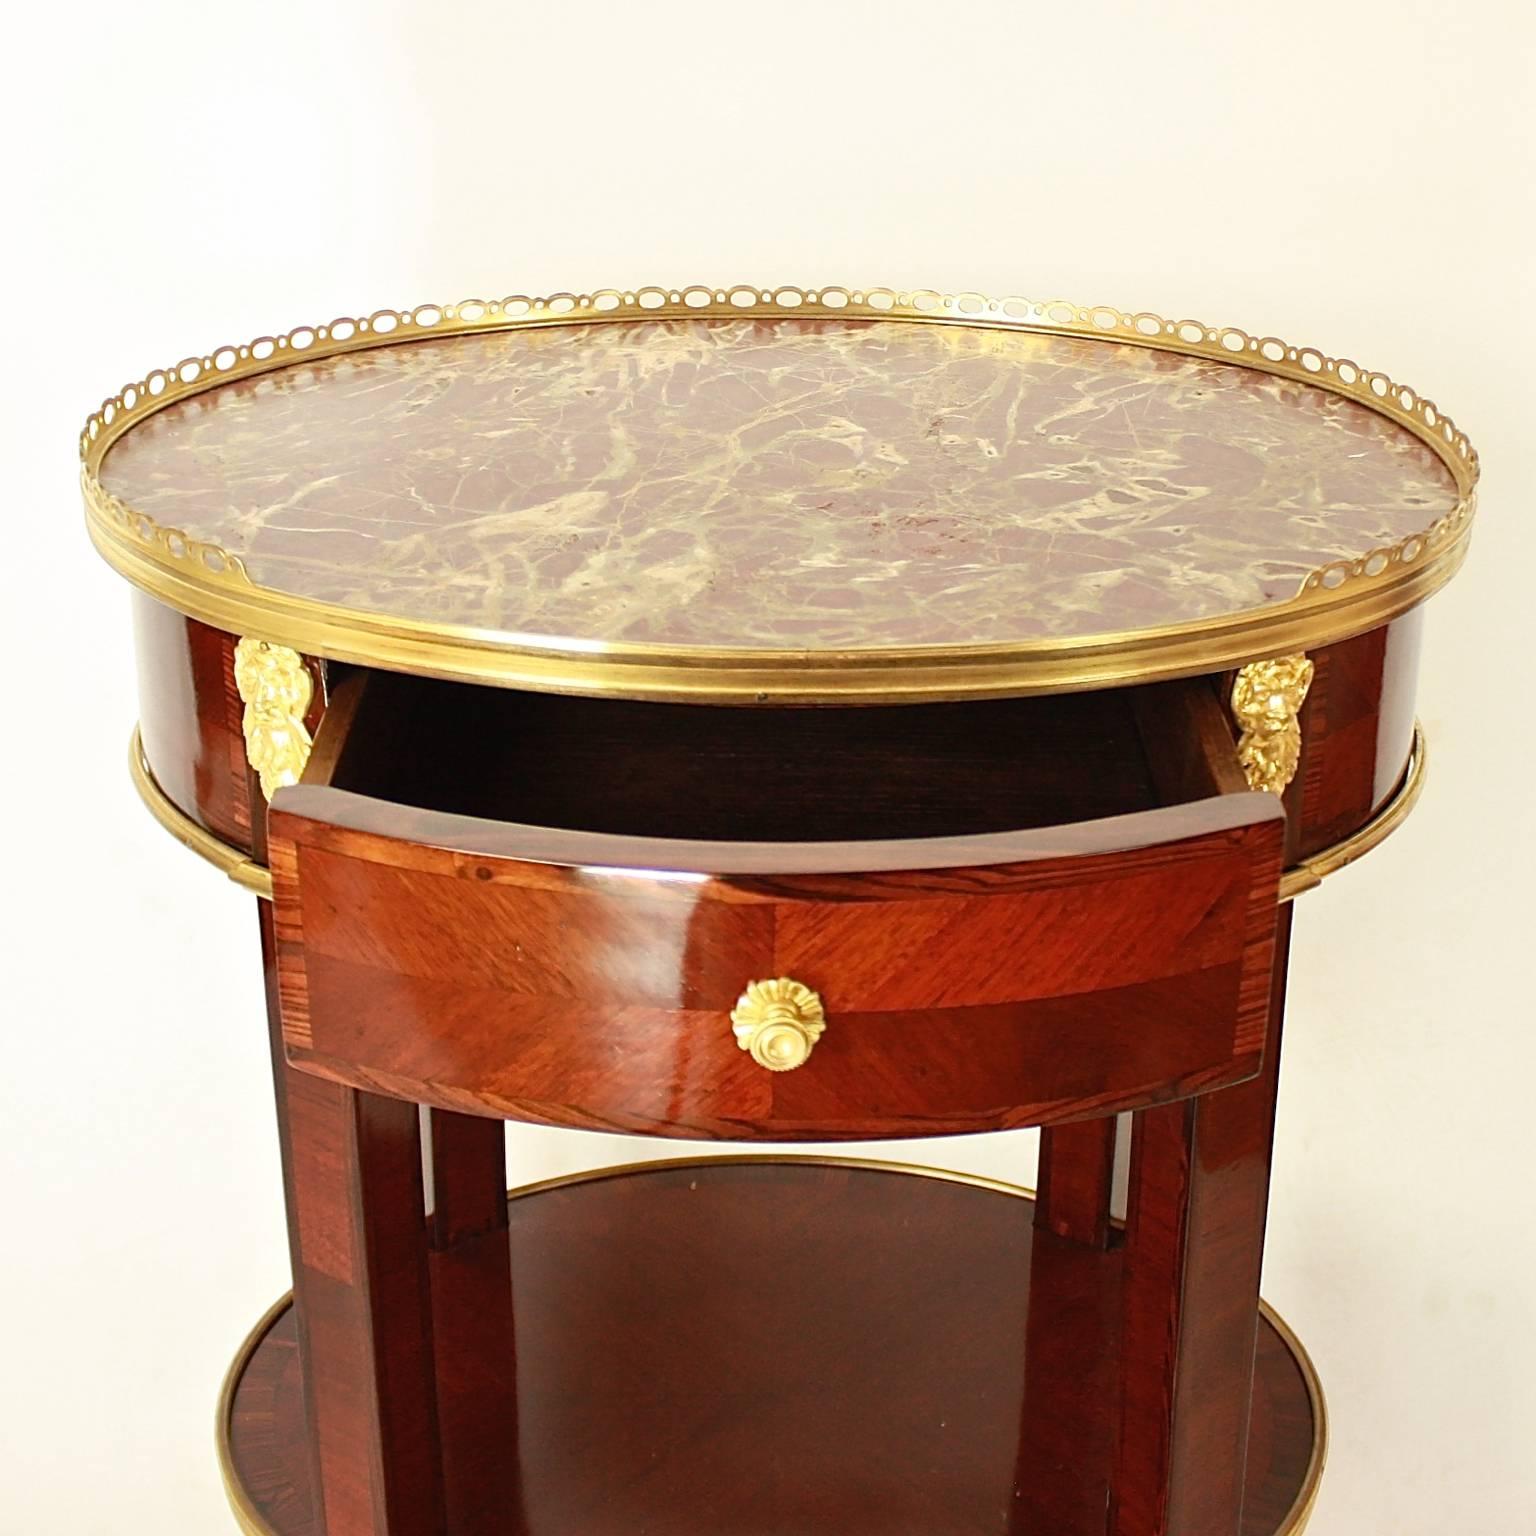 A Louis XVI style oval side table attributed to L’Escalier De crystal. The two-tier table with a dark red and white veined marble top and a gilt bronze gallery all around, the lower tier with brass banding, raised on cabriole legs. The frieze with